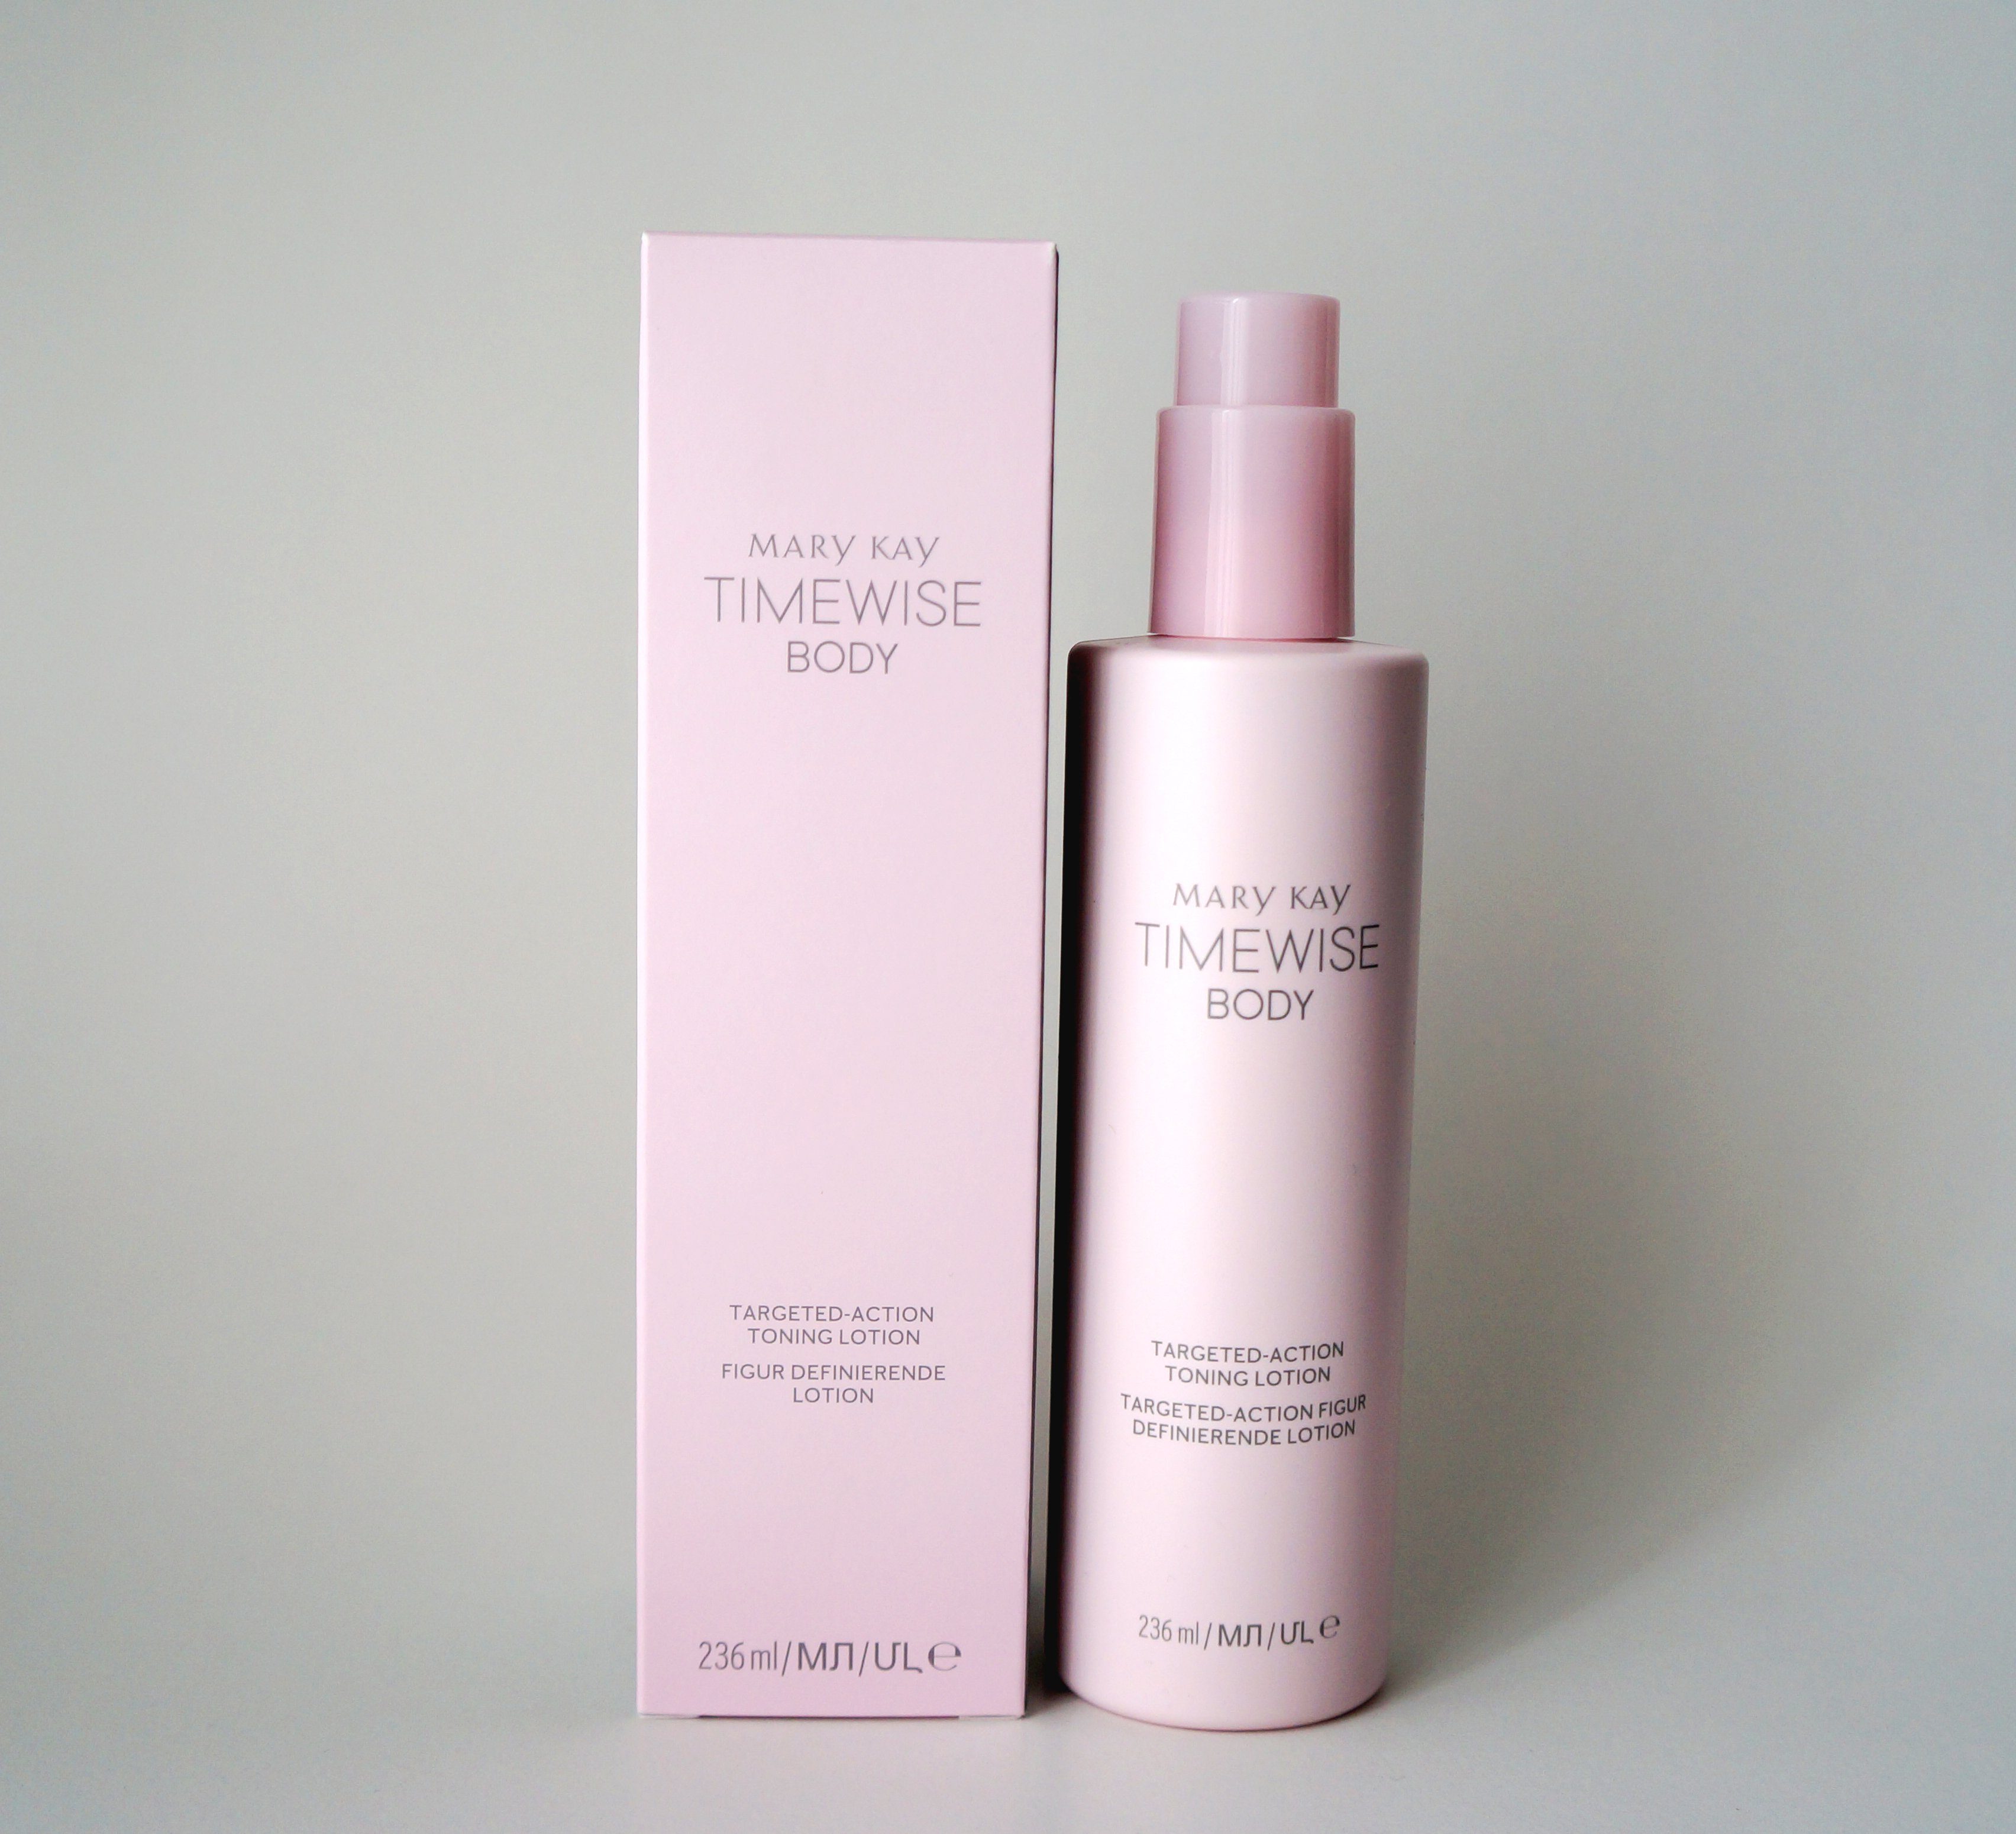 Kay Mary Lotion TimeWise Toning Körperlotion Targeted-Action Kay Body Mary 236ml